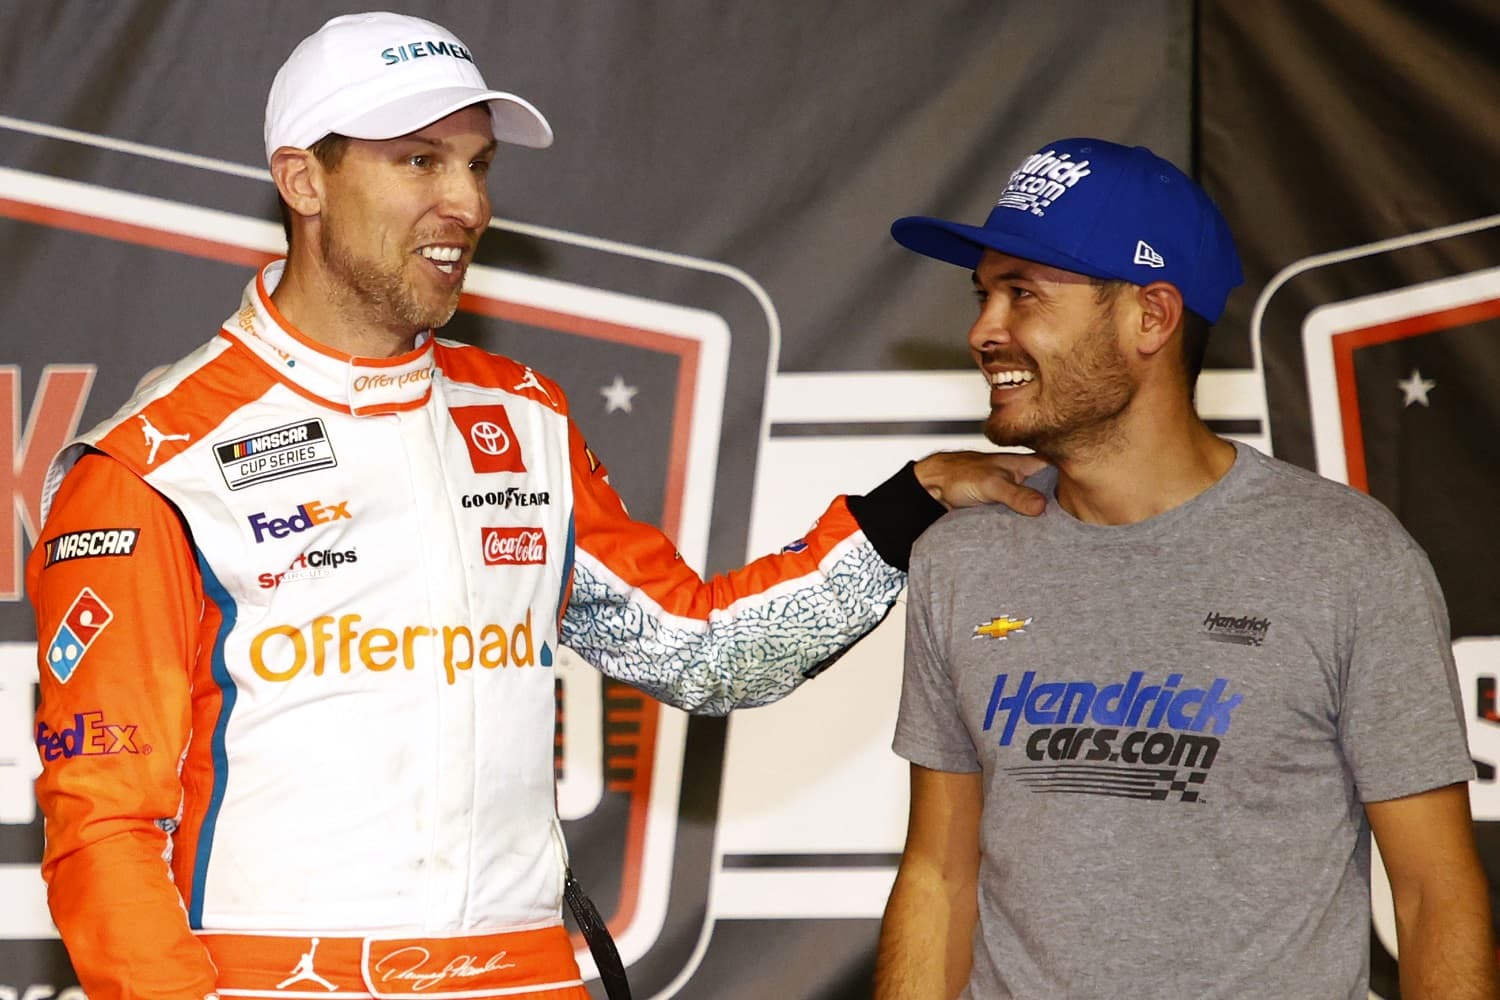 Drivers Denny Hamlin and Kyle Larson speak on Victory Lane after winning the NASCAR Cup Series Cook Out Southern 500 at Darlington Raceway on Sept. 5, 2021.